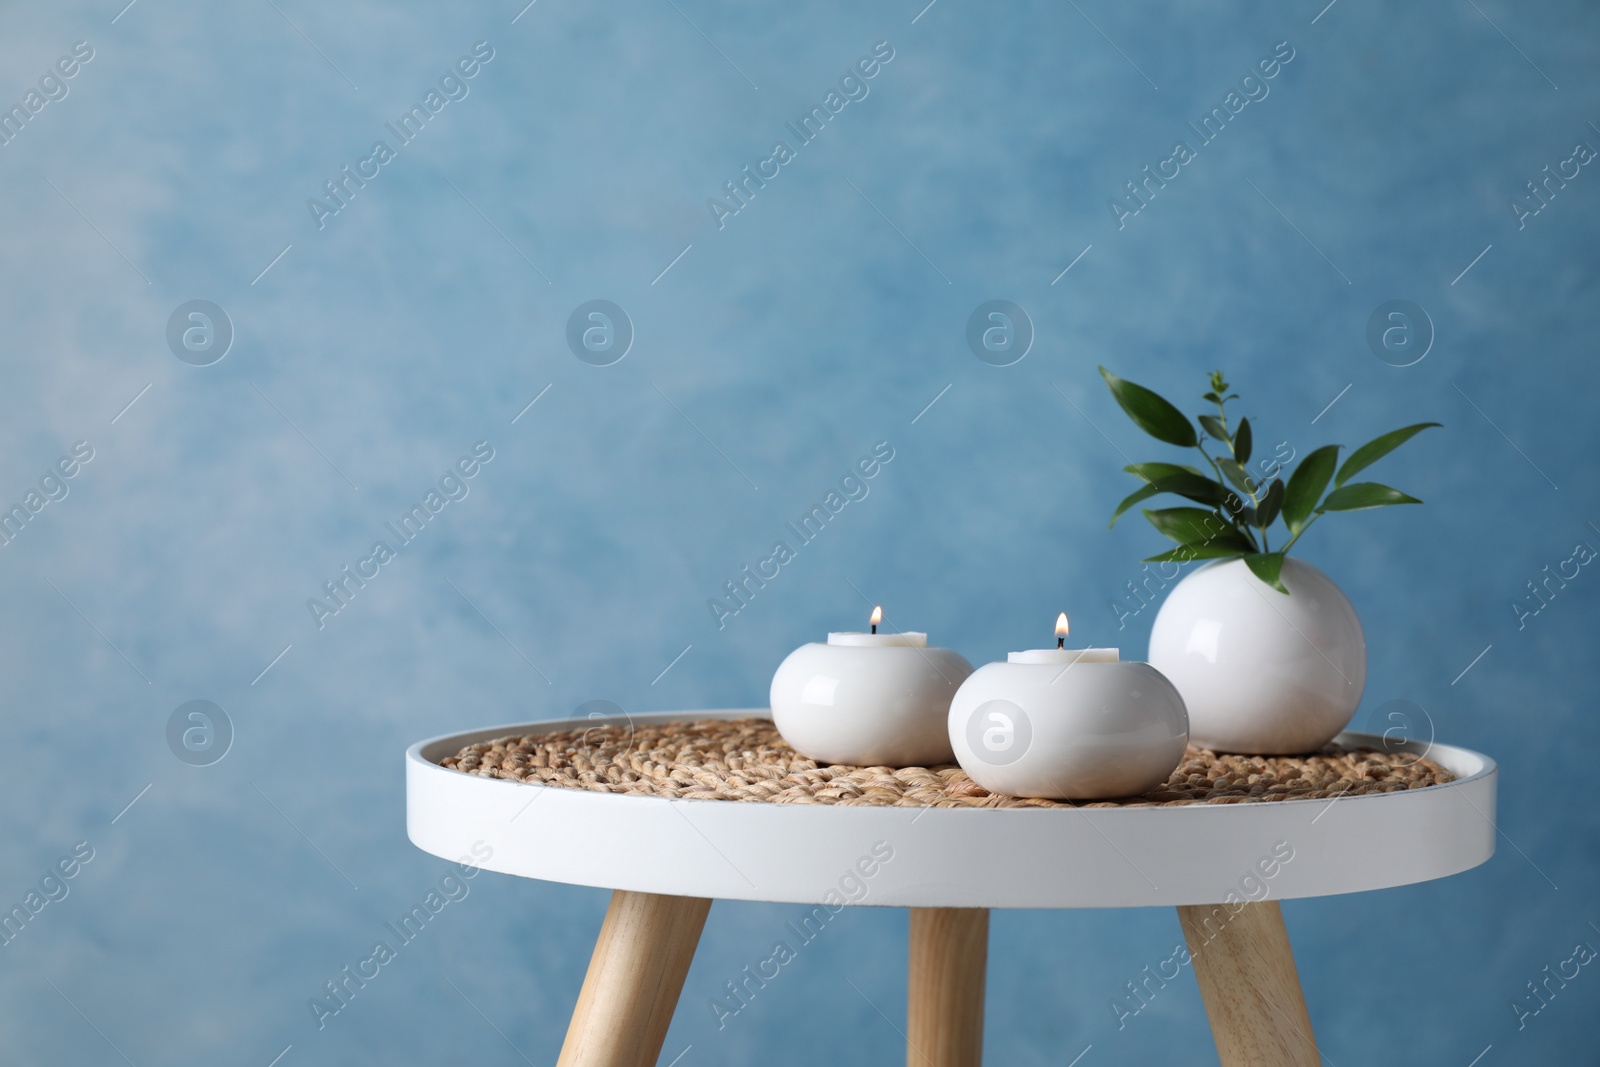 Photo of Burning candles and plant on white table against light blue background, space for text